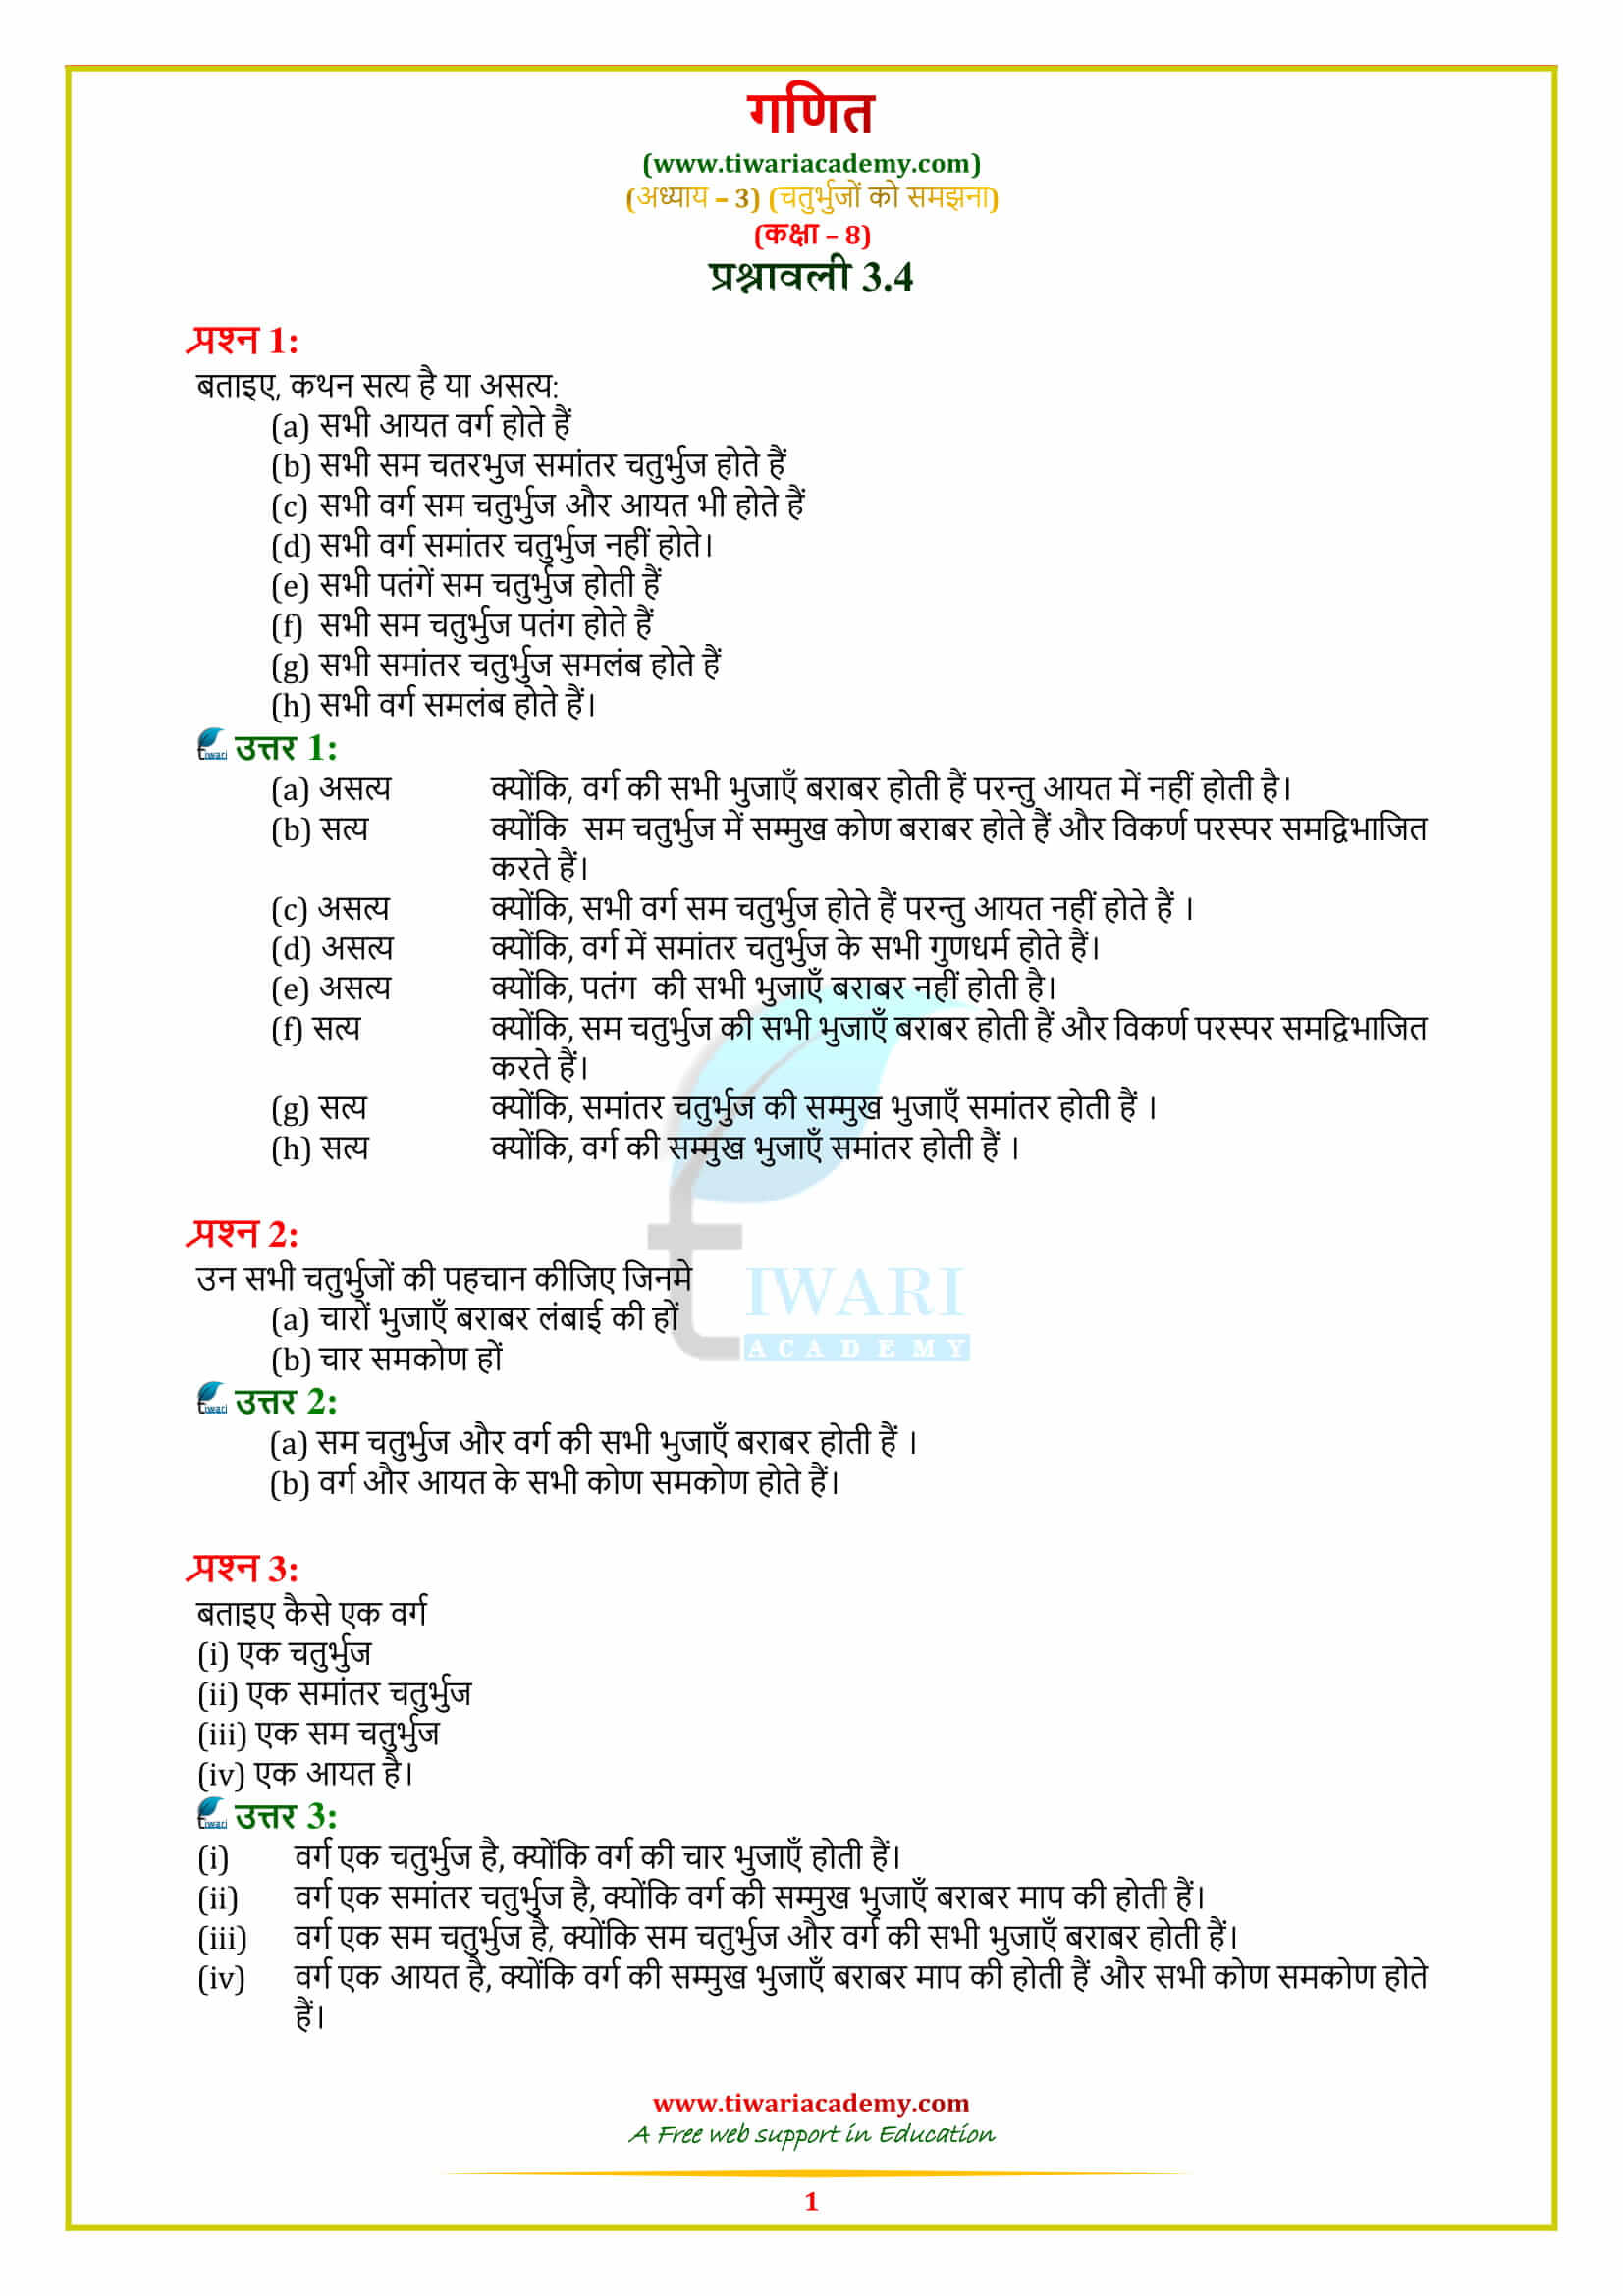 8 Maths solutions Exercise 3.4 in hindi medium pdf form